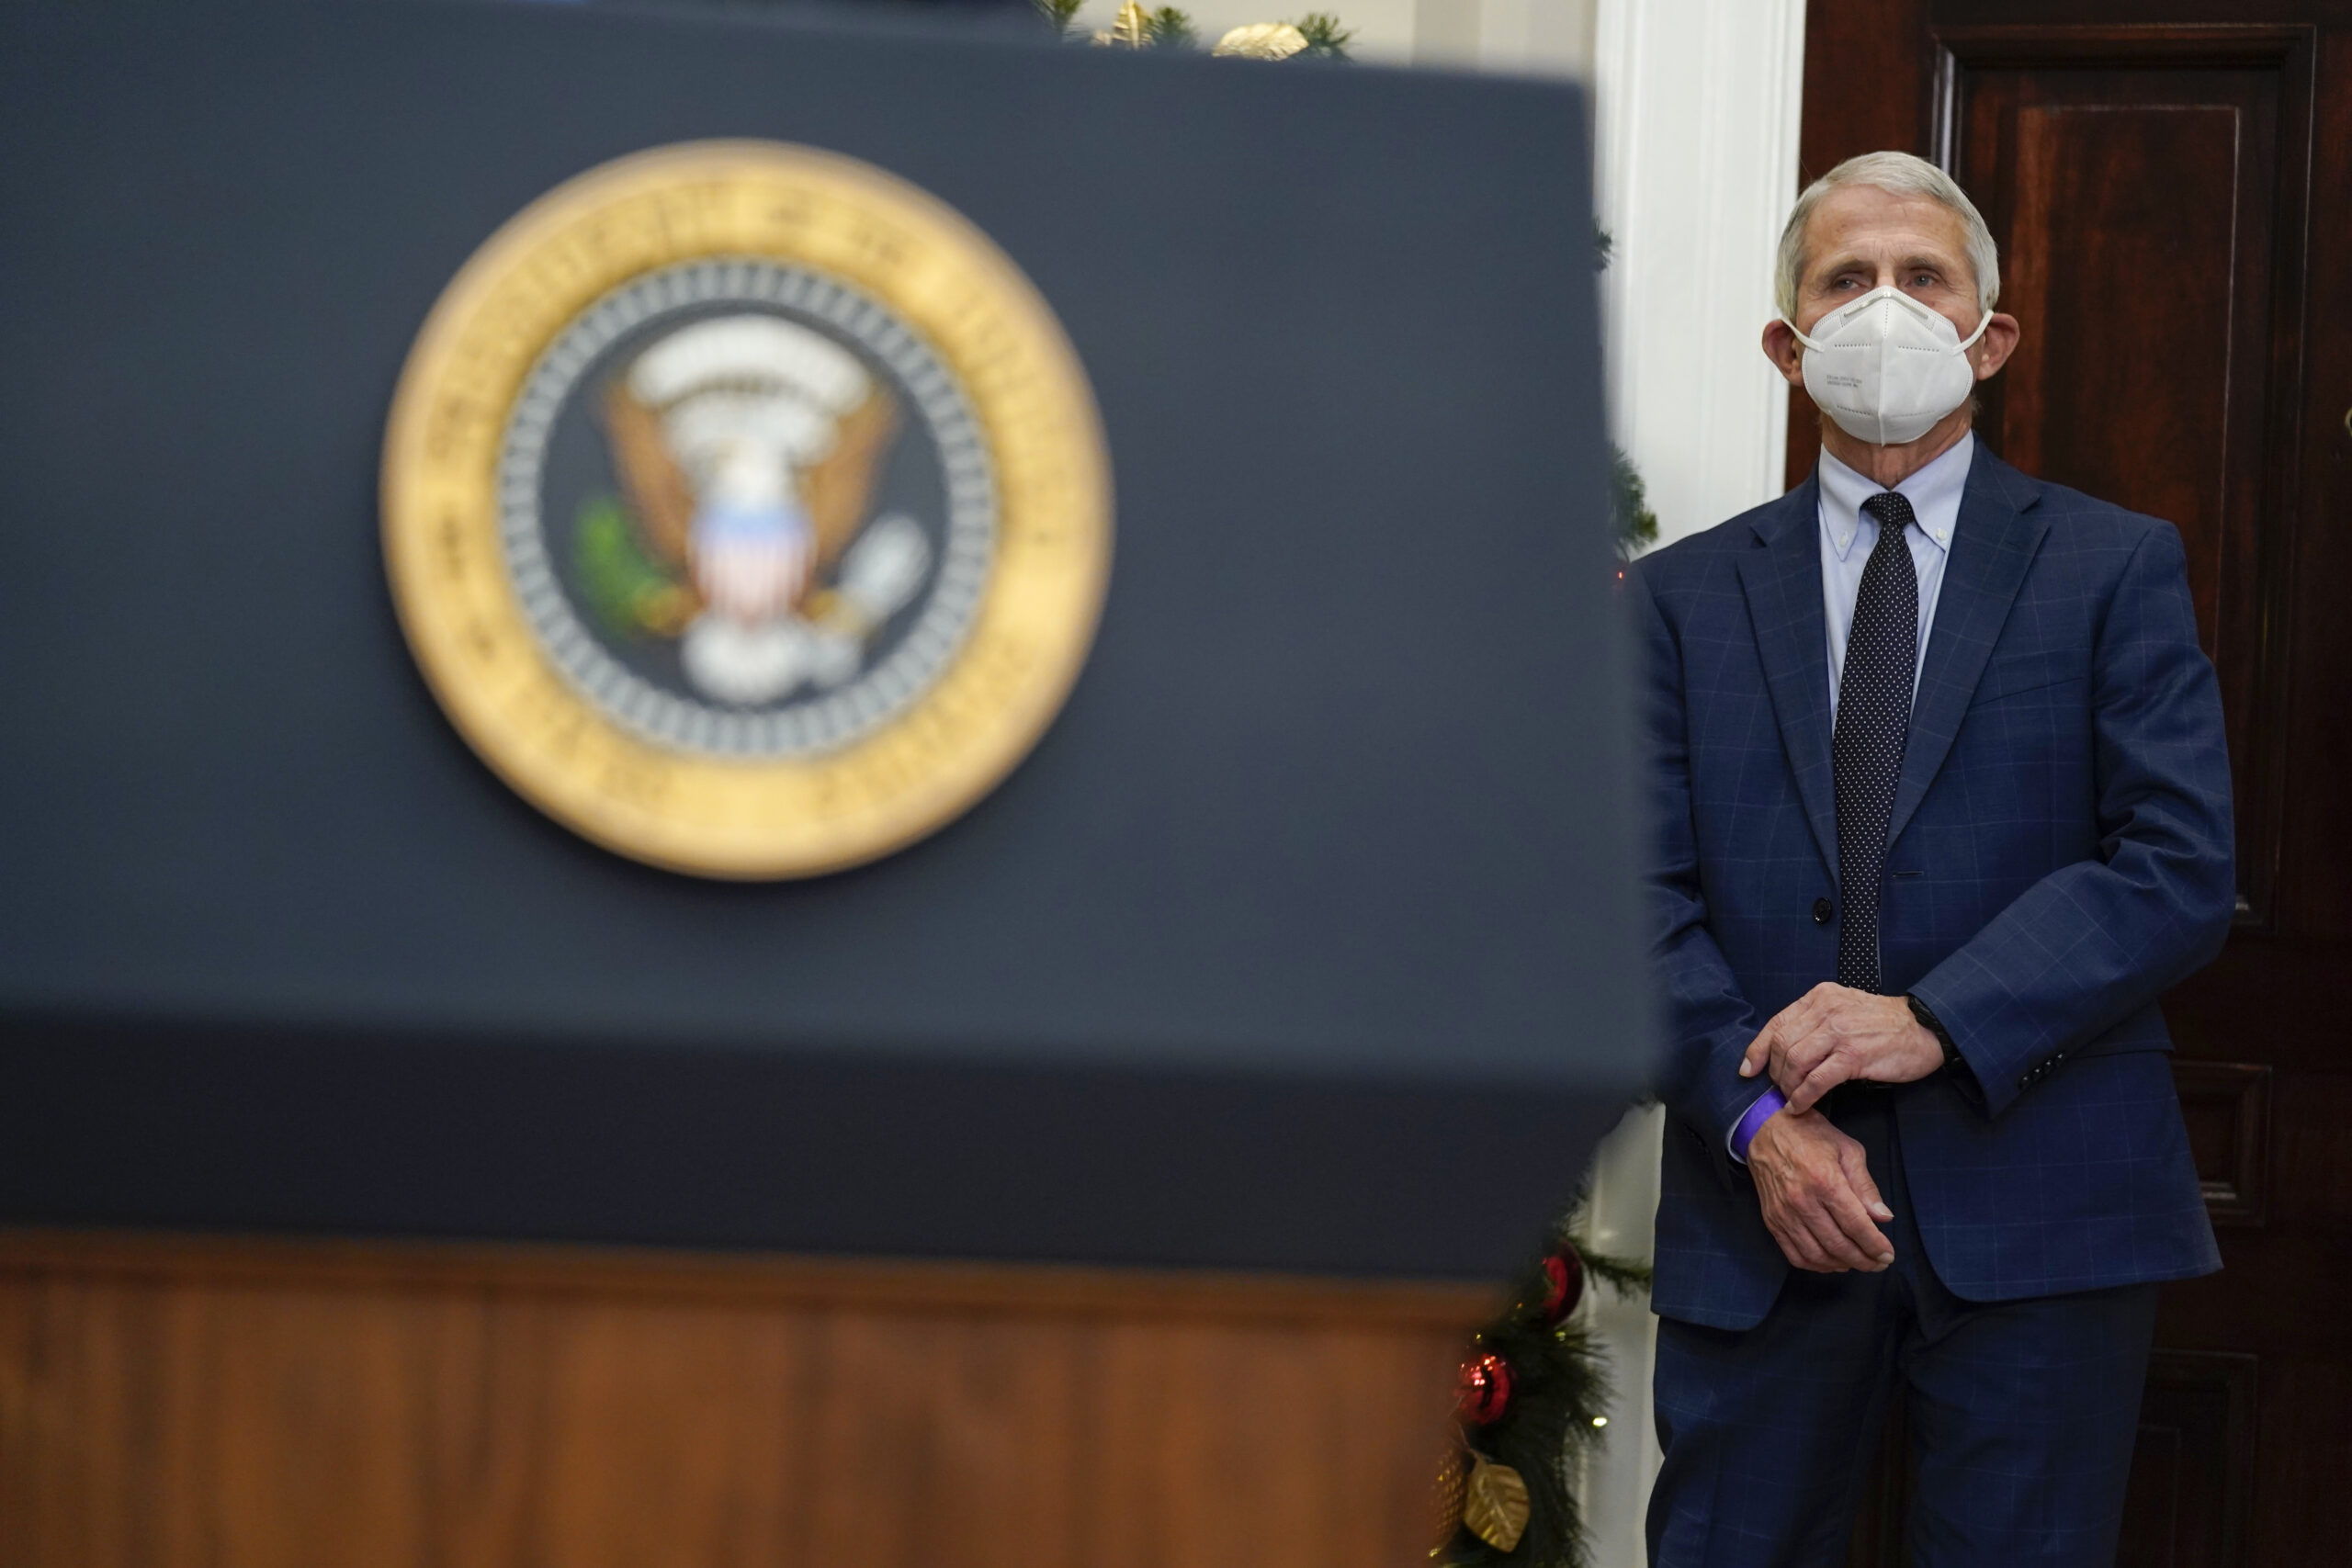 Dr. Anthony Fauci, director of the National Institute of Allergy listens as President Joe Biden speaks about the COVID-19 variant named omicron, in the Roosevelt Room of the White House, Monday, Nov. 29, 2021, in Washington. (AP Photo/Evan Vucci)